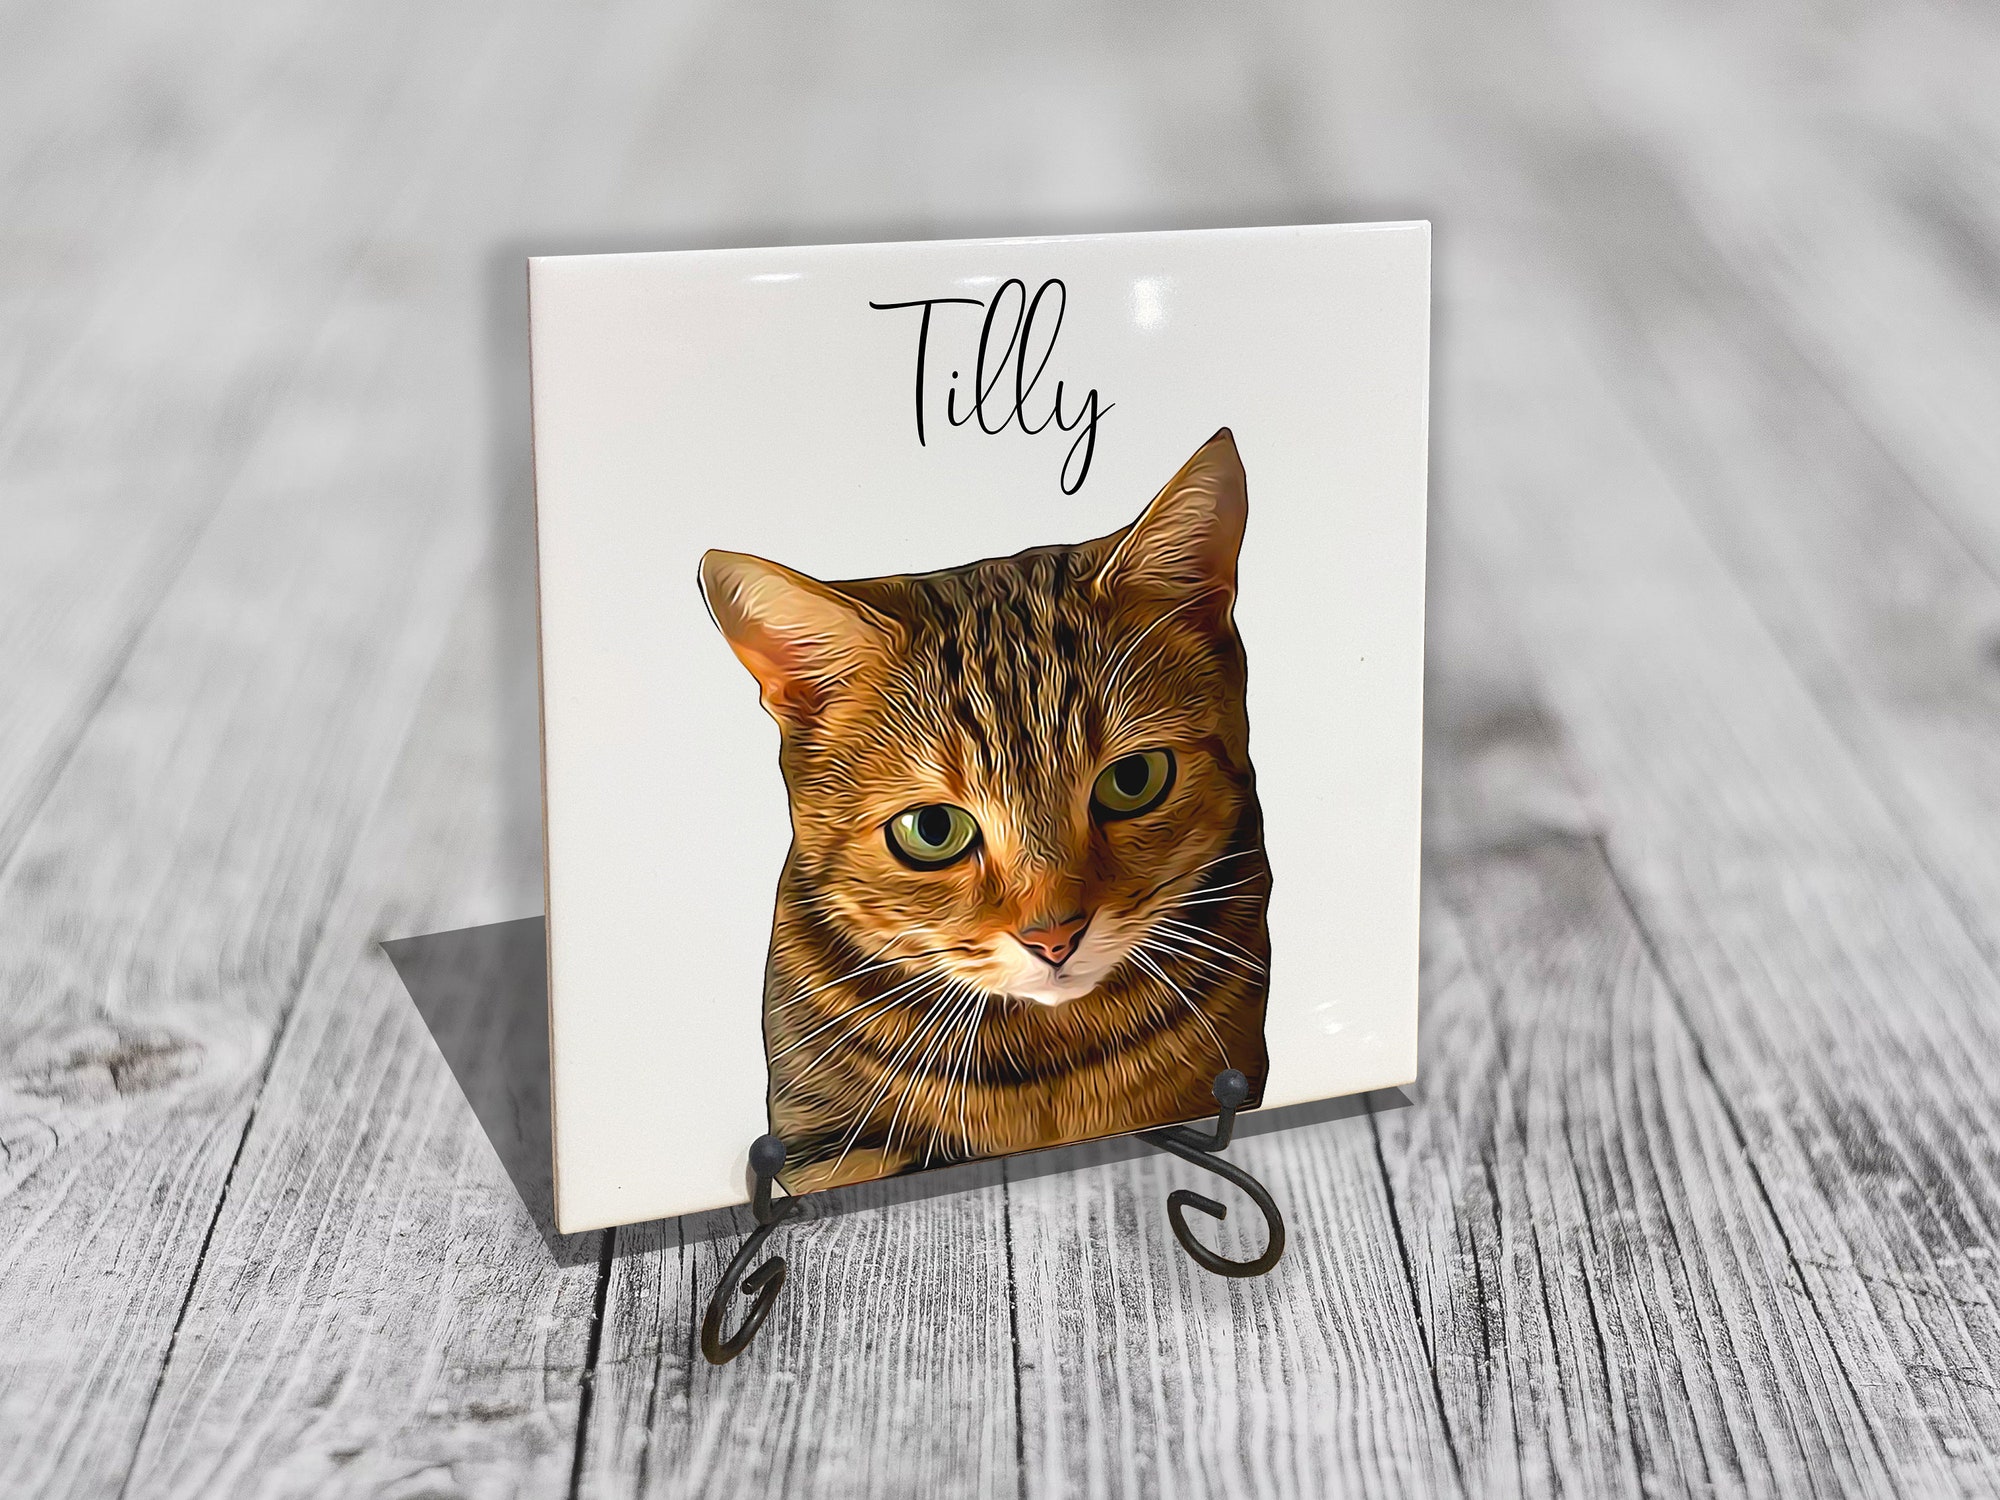 Personalised Pet Portrait on Tile with Stand - Dog Cat Brush Custom Photo Print on CERAMIC TILE